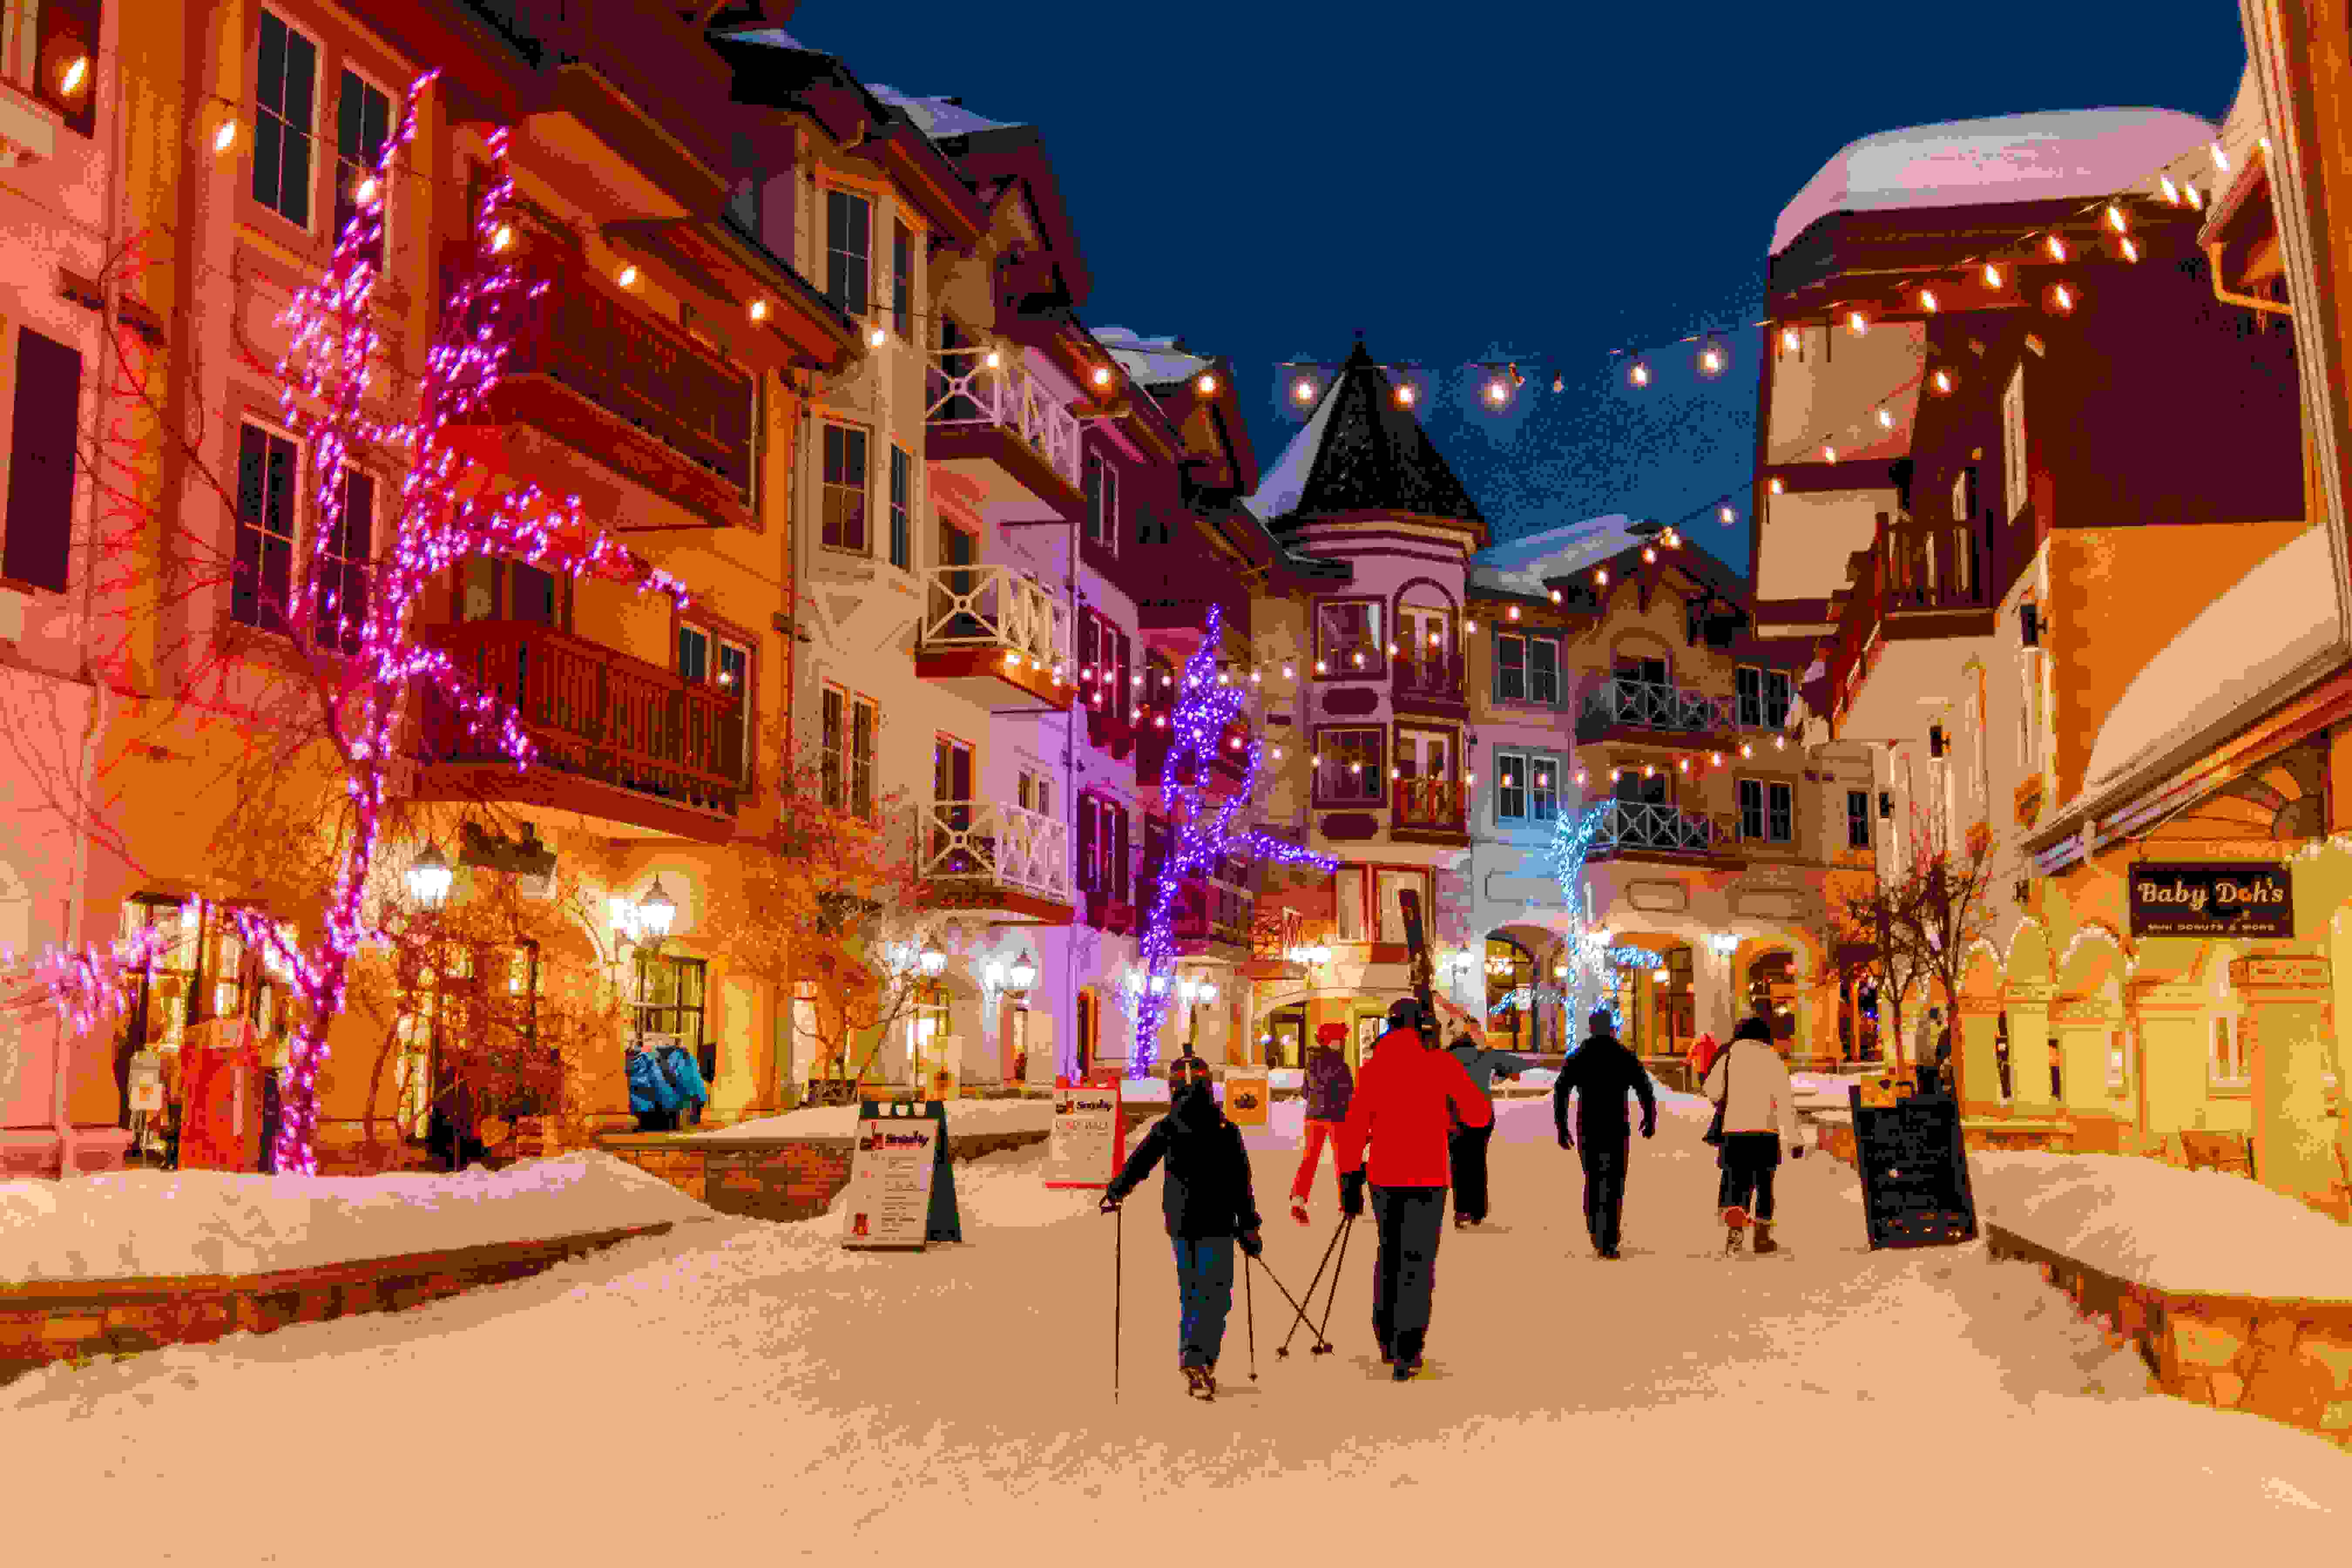 Ski Escape: Join this hosted group trip